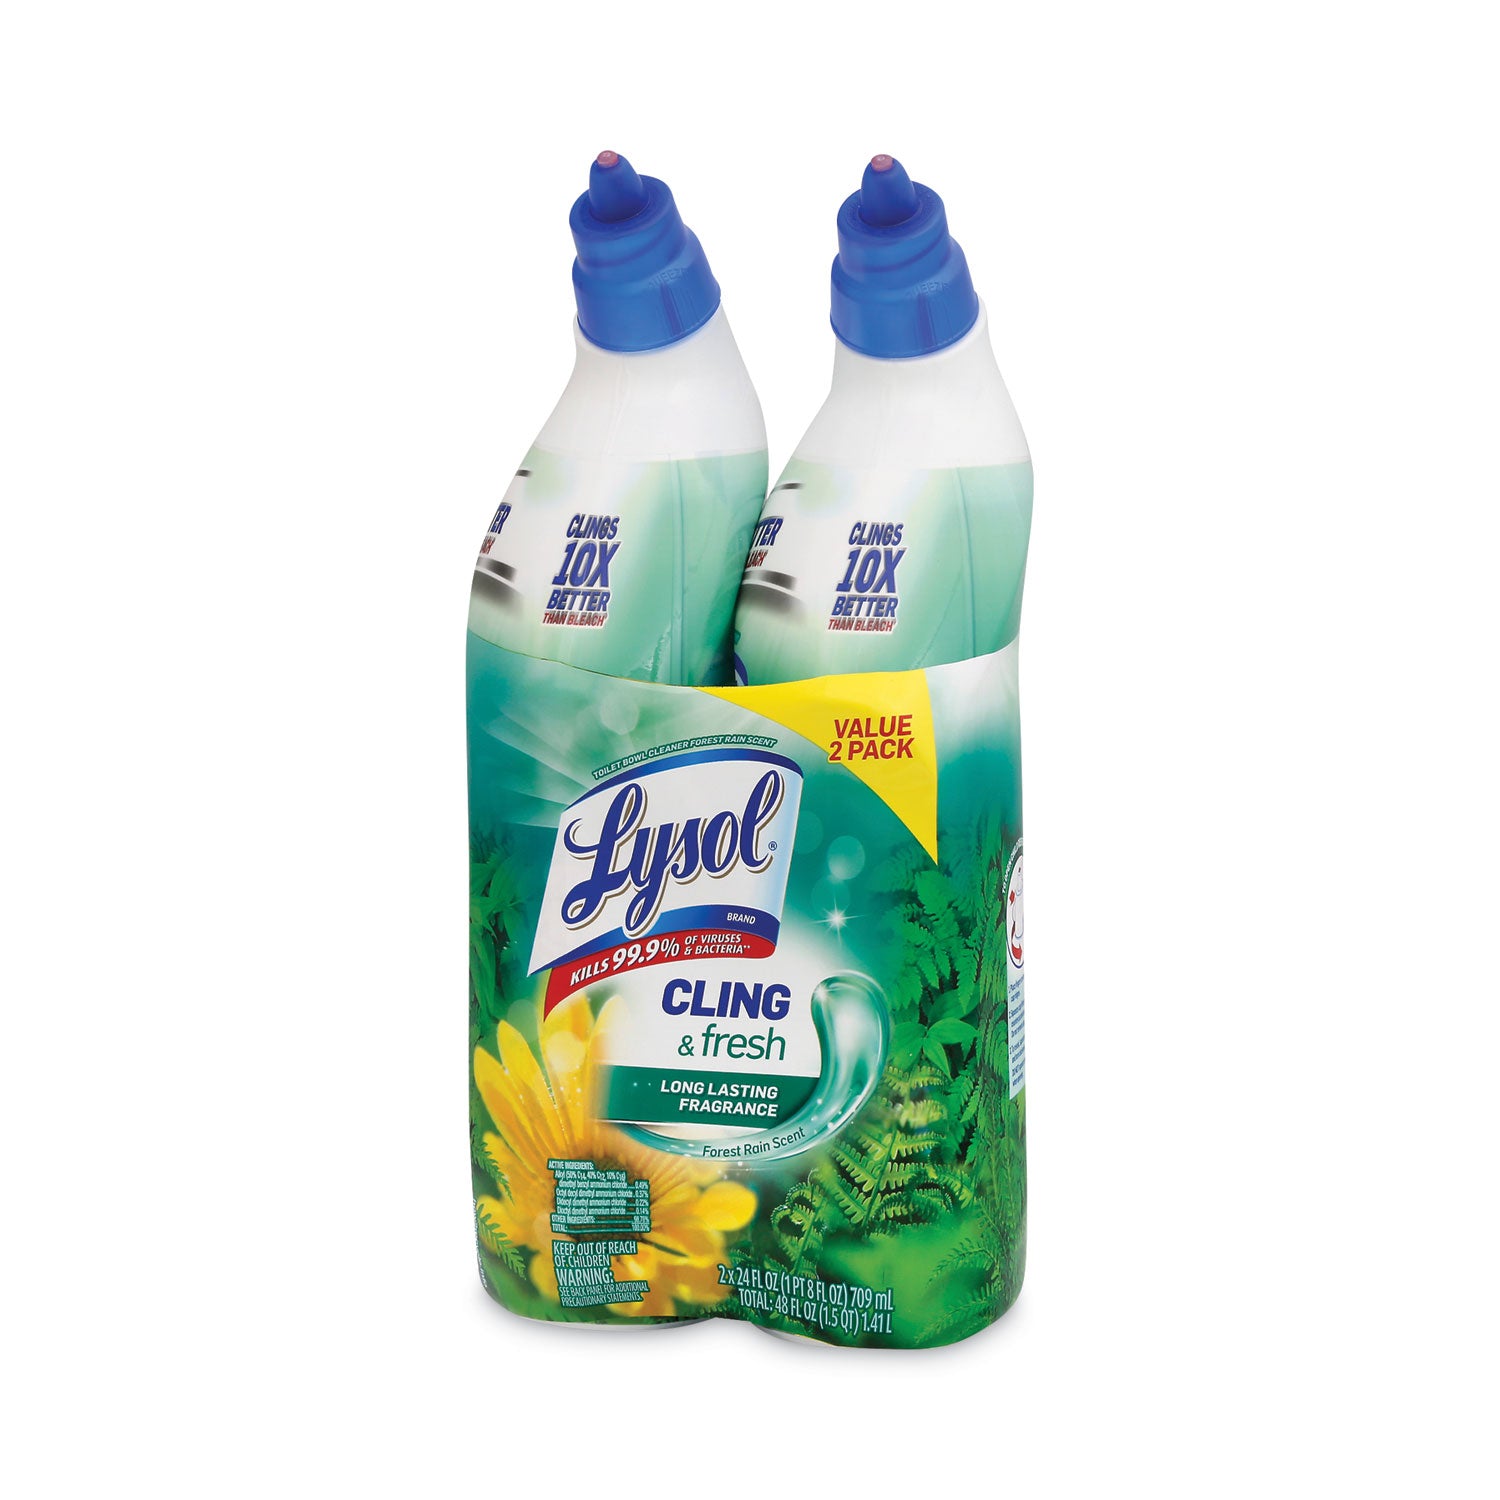 cling-and-fresh-toilet-bowl-cleaner-forest-rain-scent-24-oz-2-pack-4-packs-carton_rac98015 - 7